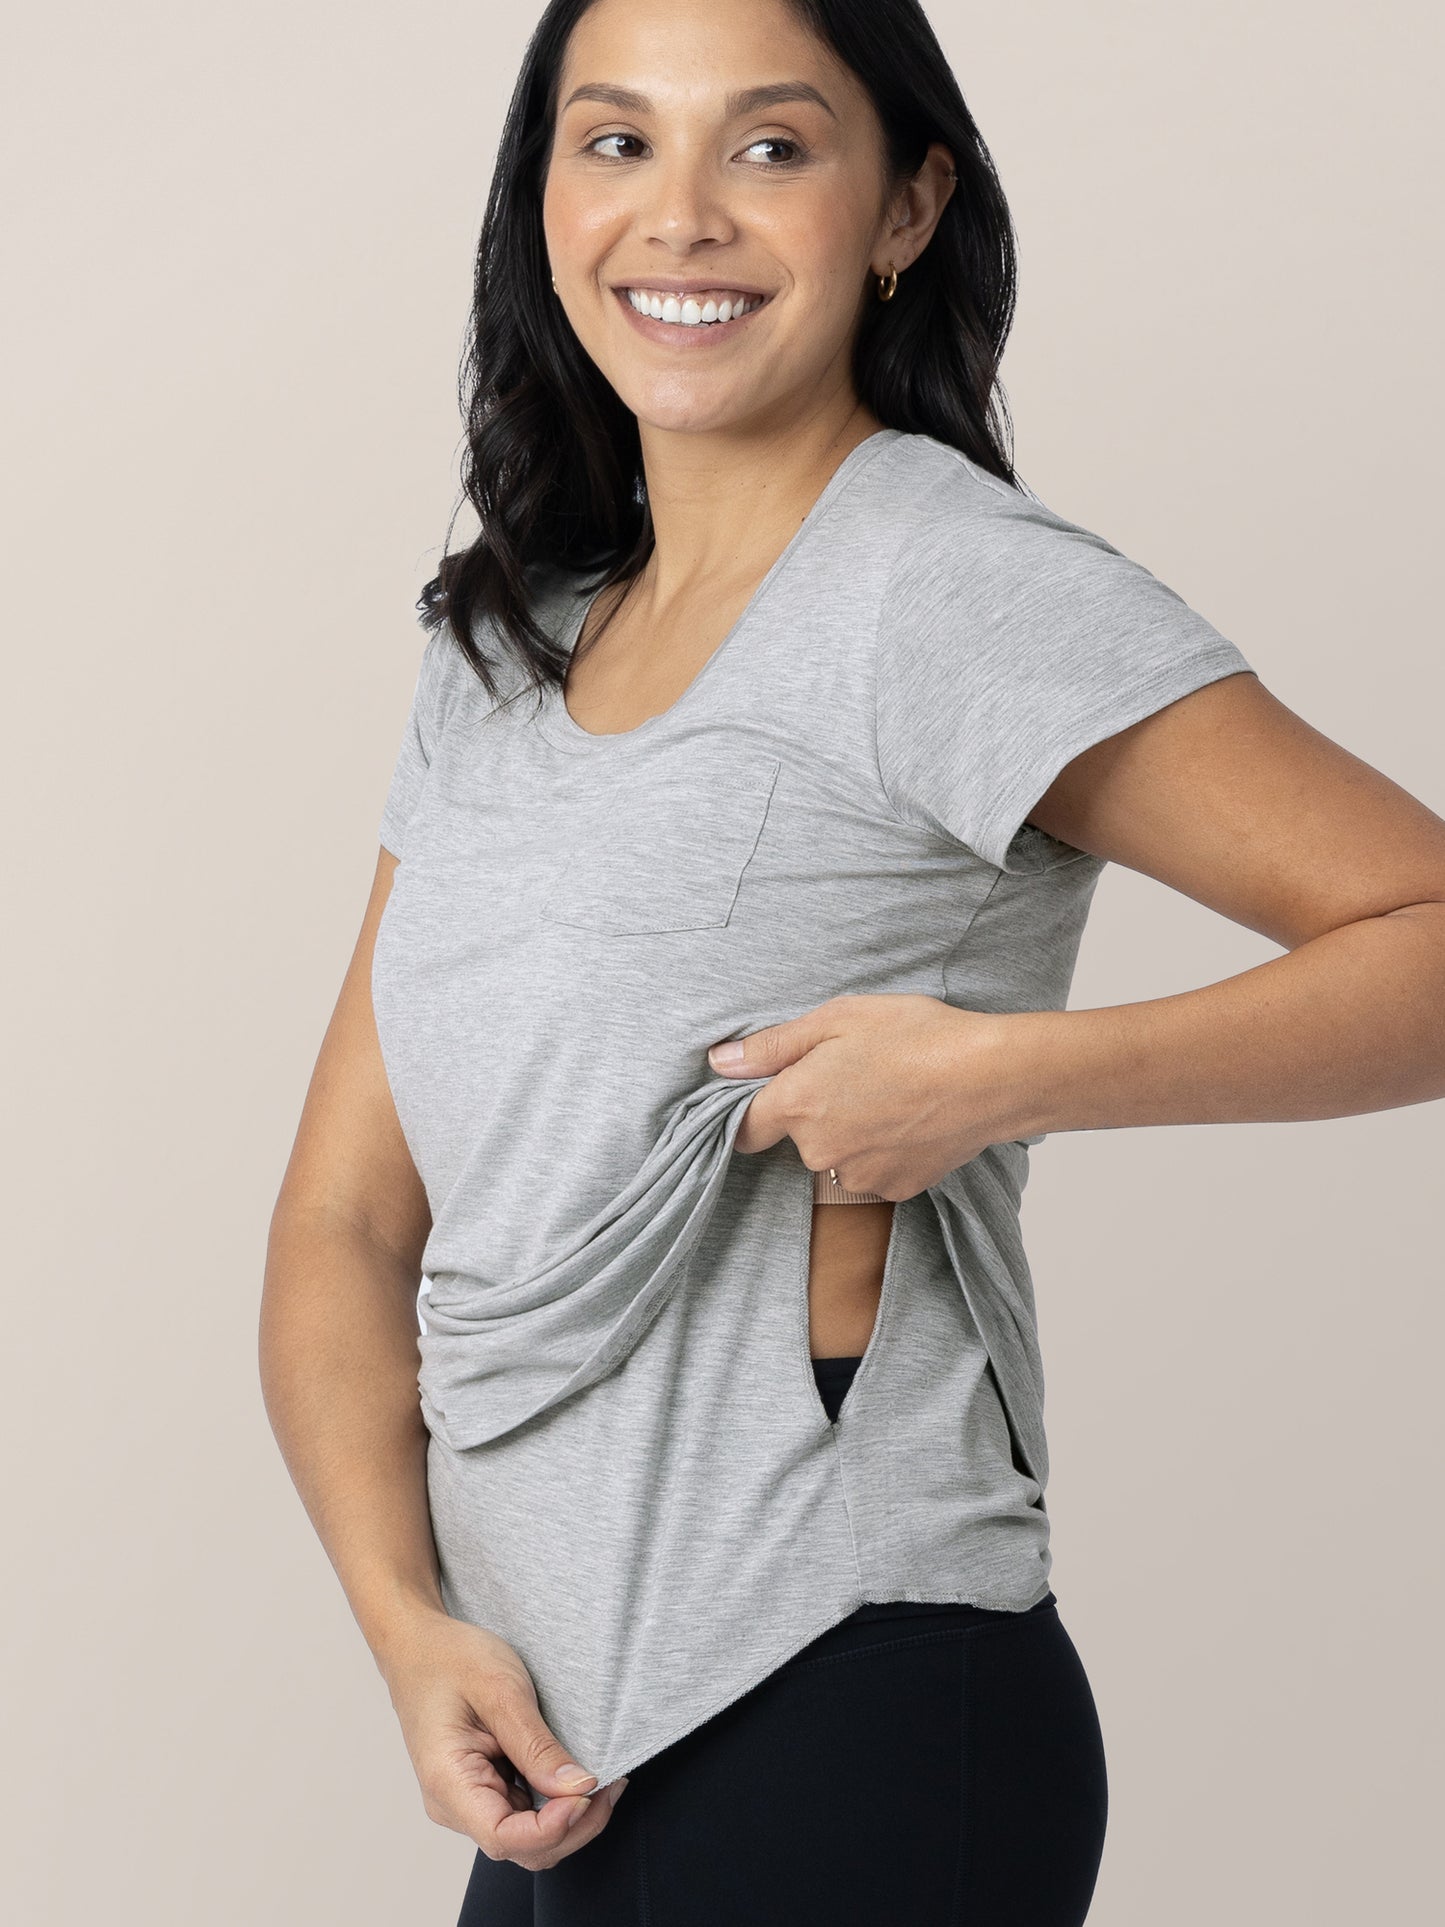 Model wearing the Everyday Maternity & Nursing T-shirt in Grey Heather showing the easy pull aside nursing panel.